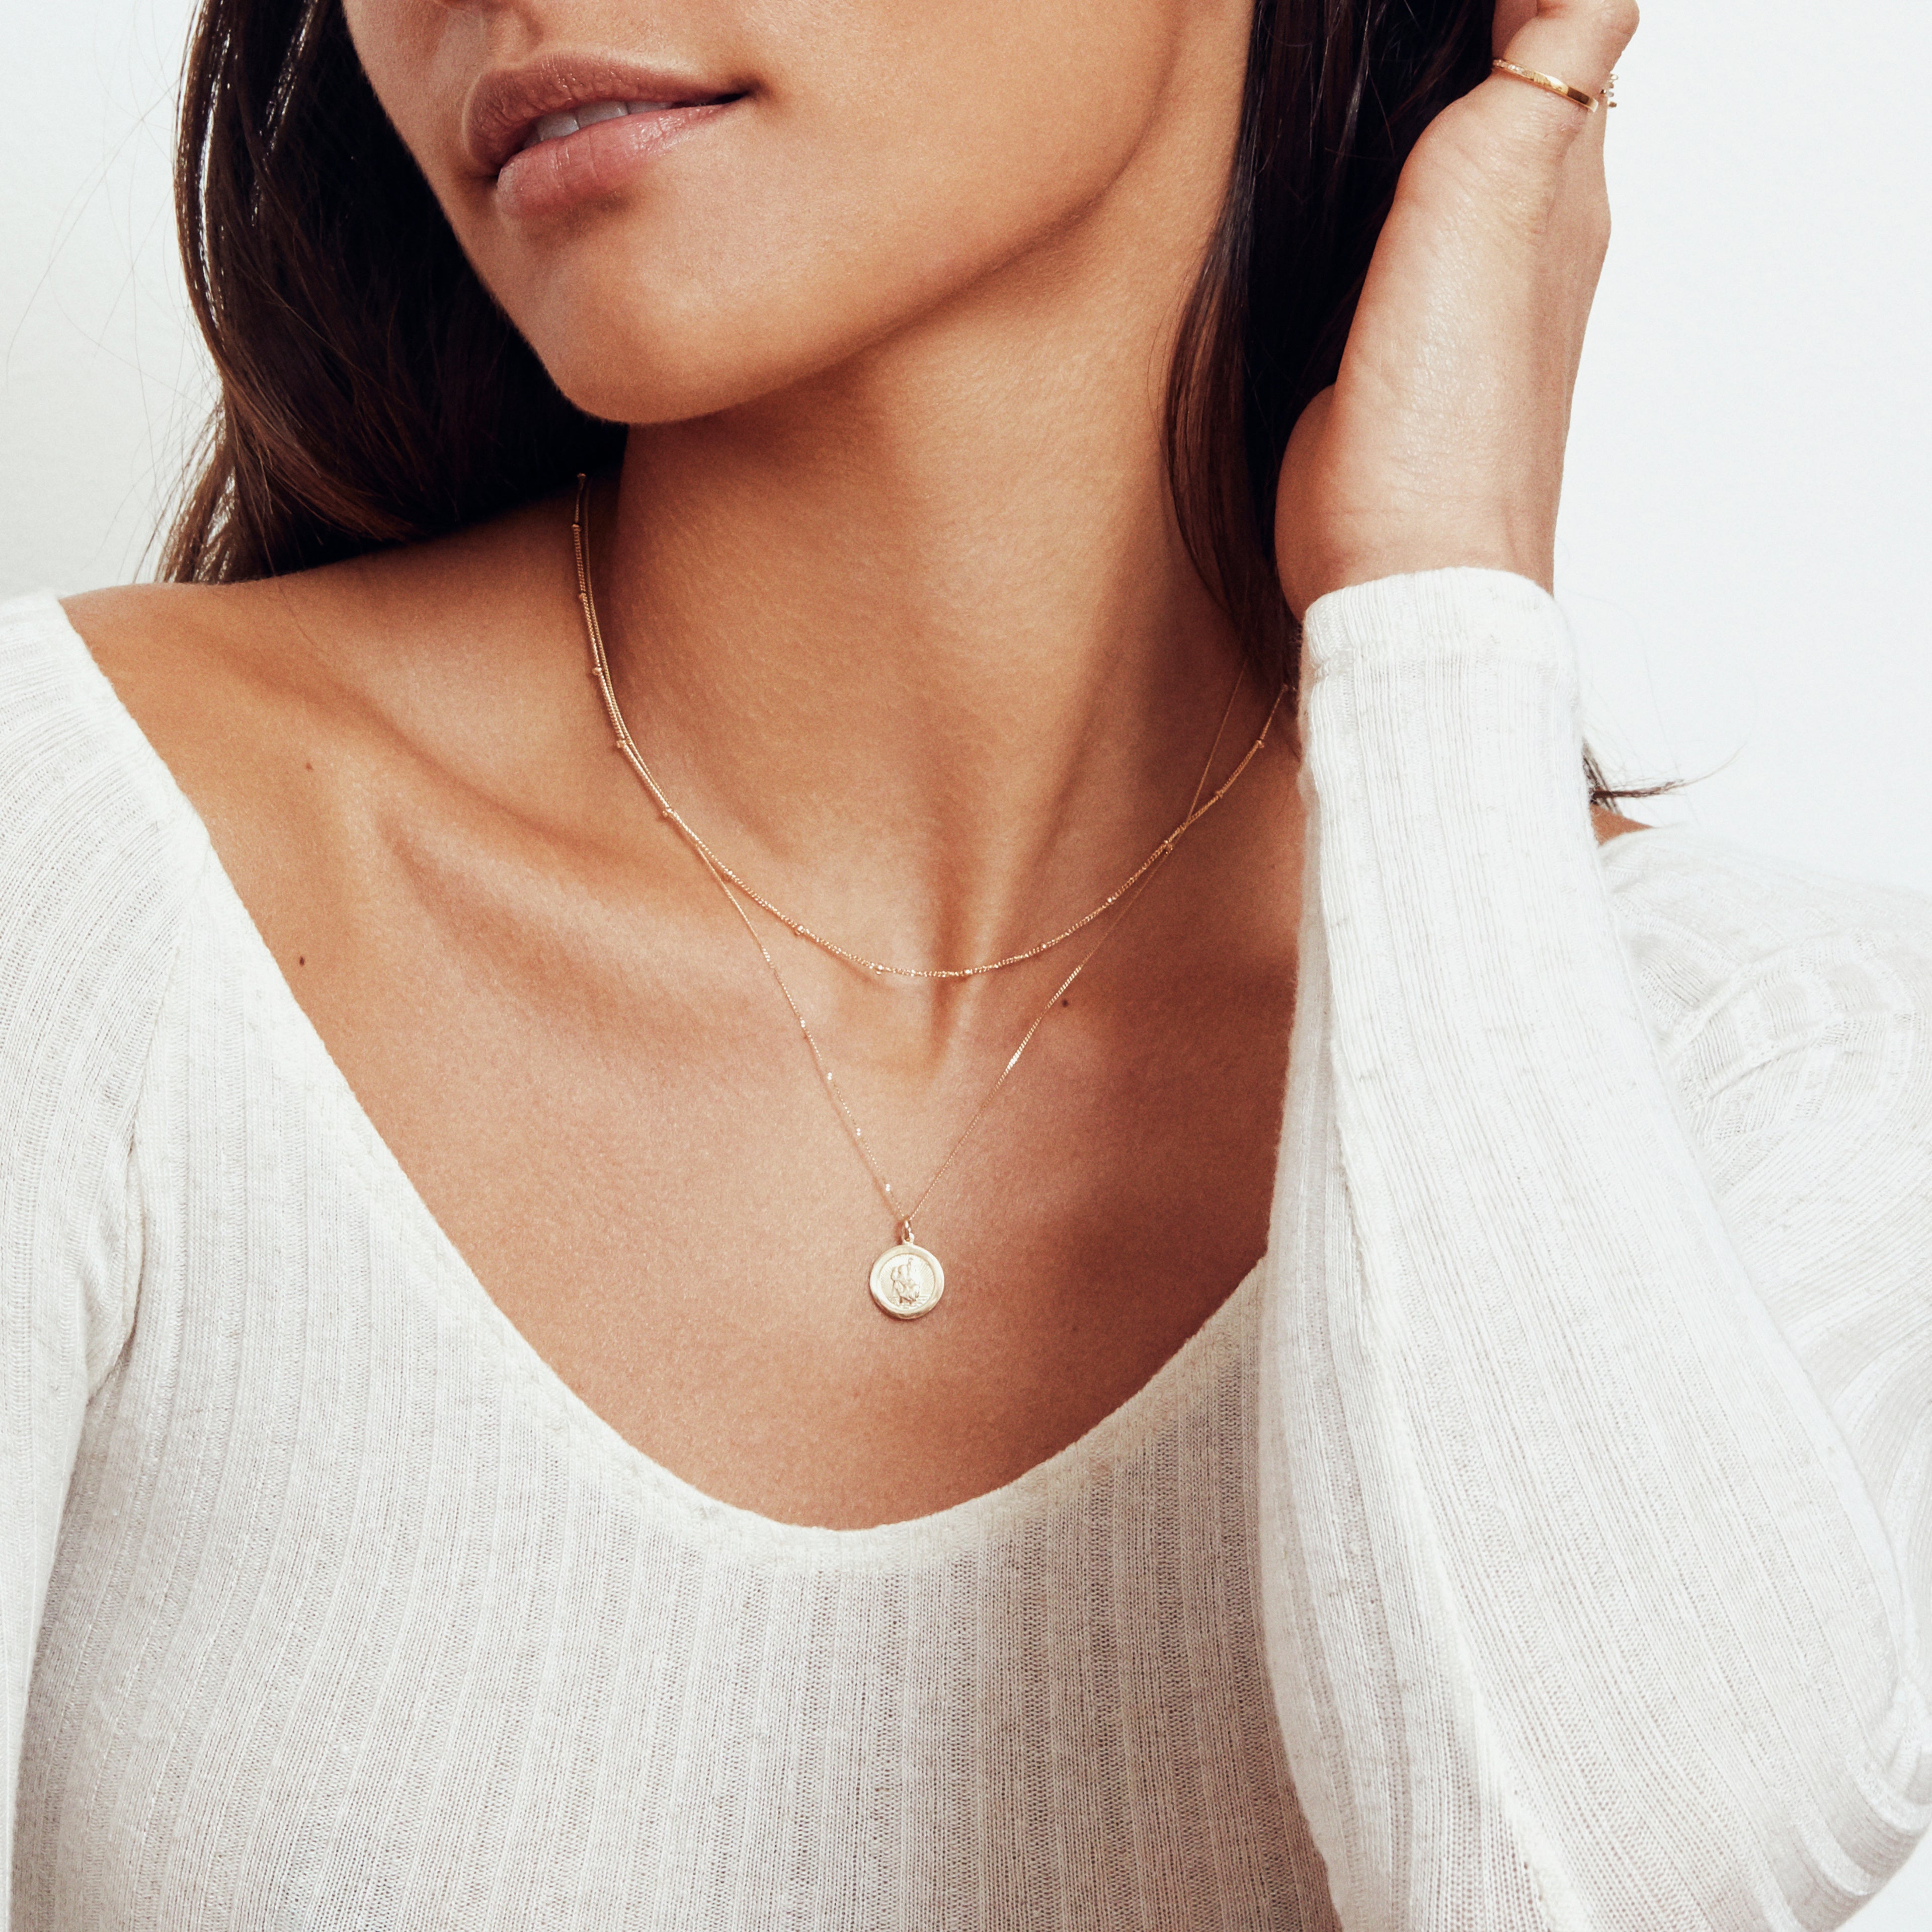 Gold satellite chain necklace layered with a gold pendant necklace on a women wearing a white long sleeve top